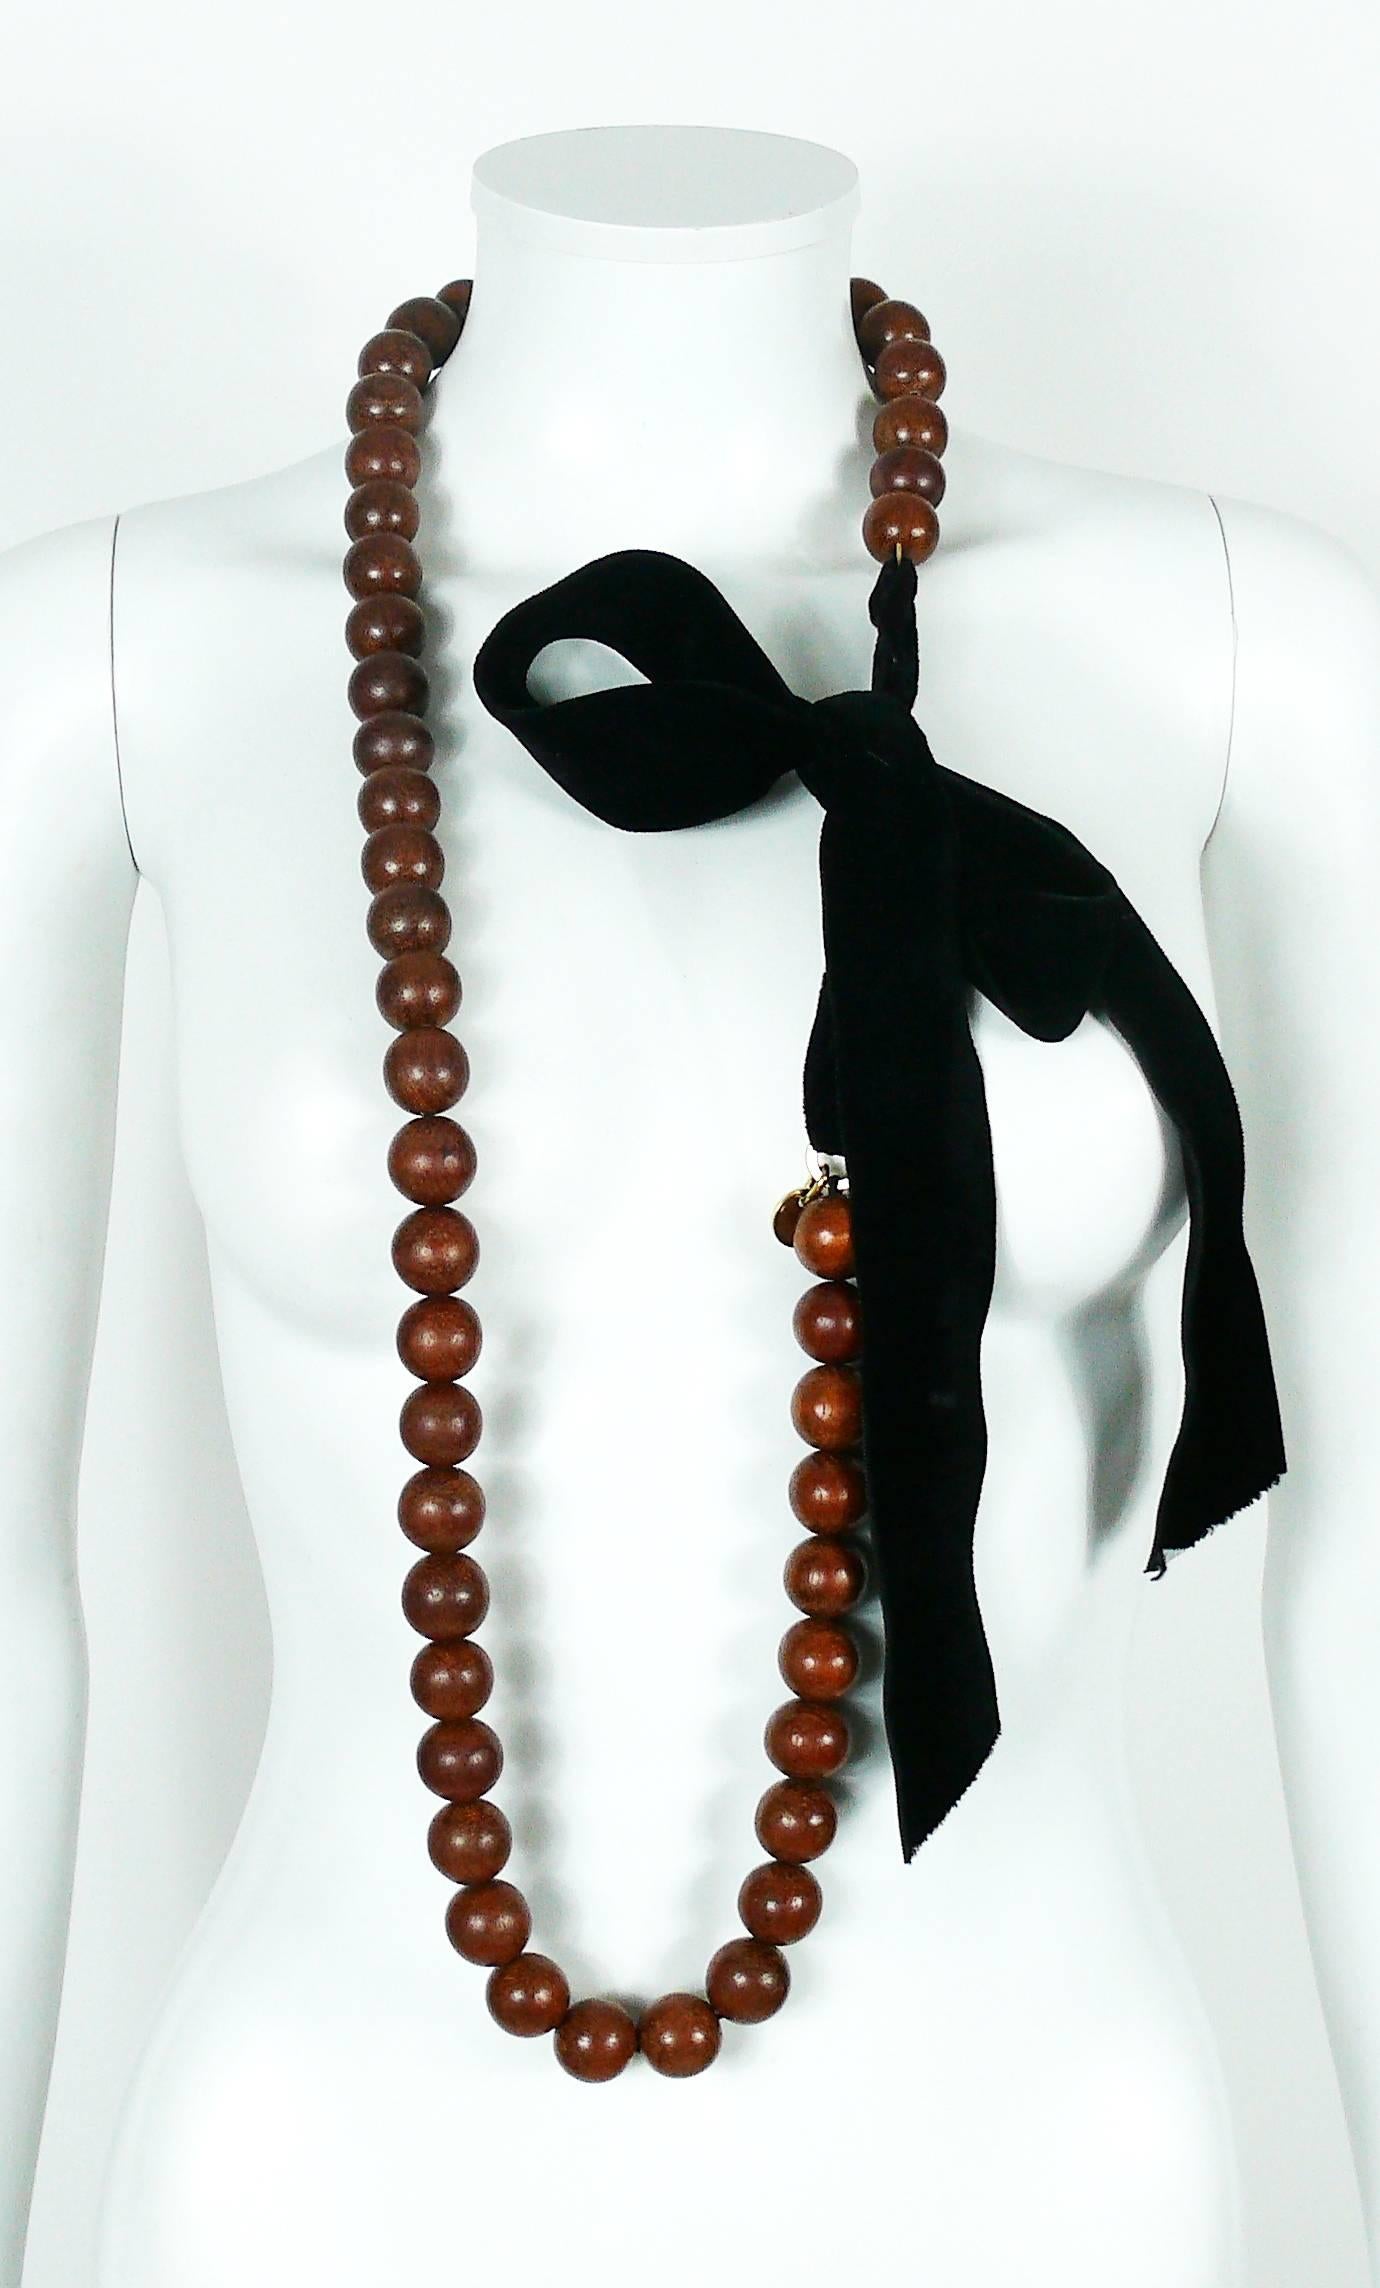 YVES SAINT LAURENT necklace featuring natural wood beads and black velvet ribbon.

Tie closure.

Embossed YSL.

Indicative measurements : total length approx. 214 cm (84.25 inches) / bead diameter approx. 1.7 cm (0.67 inch) / velvet ribbon width